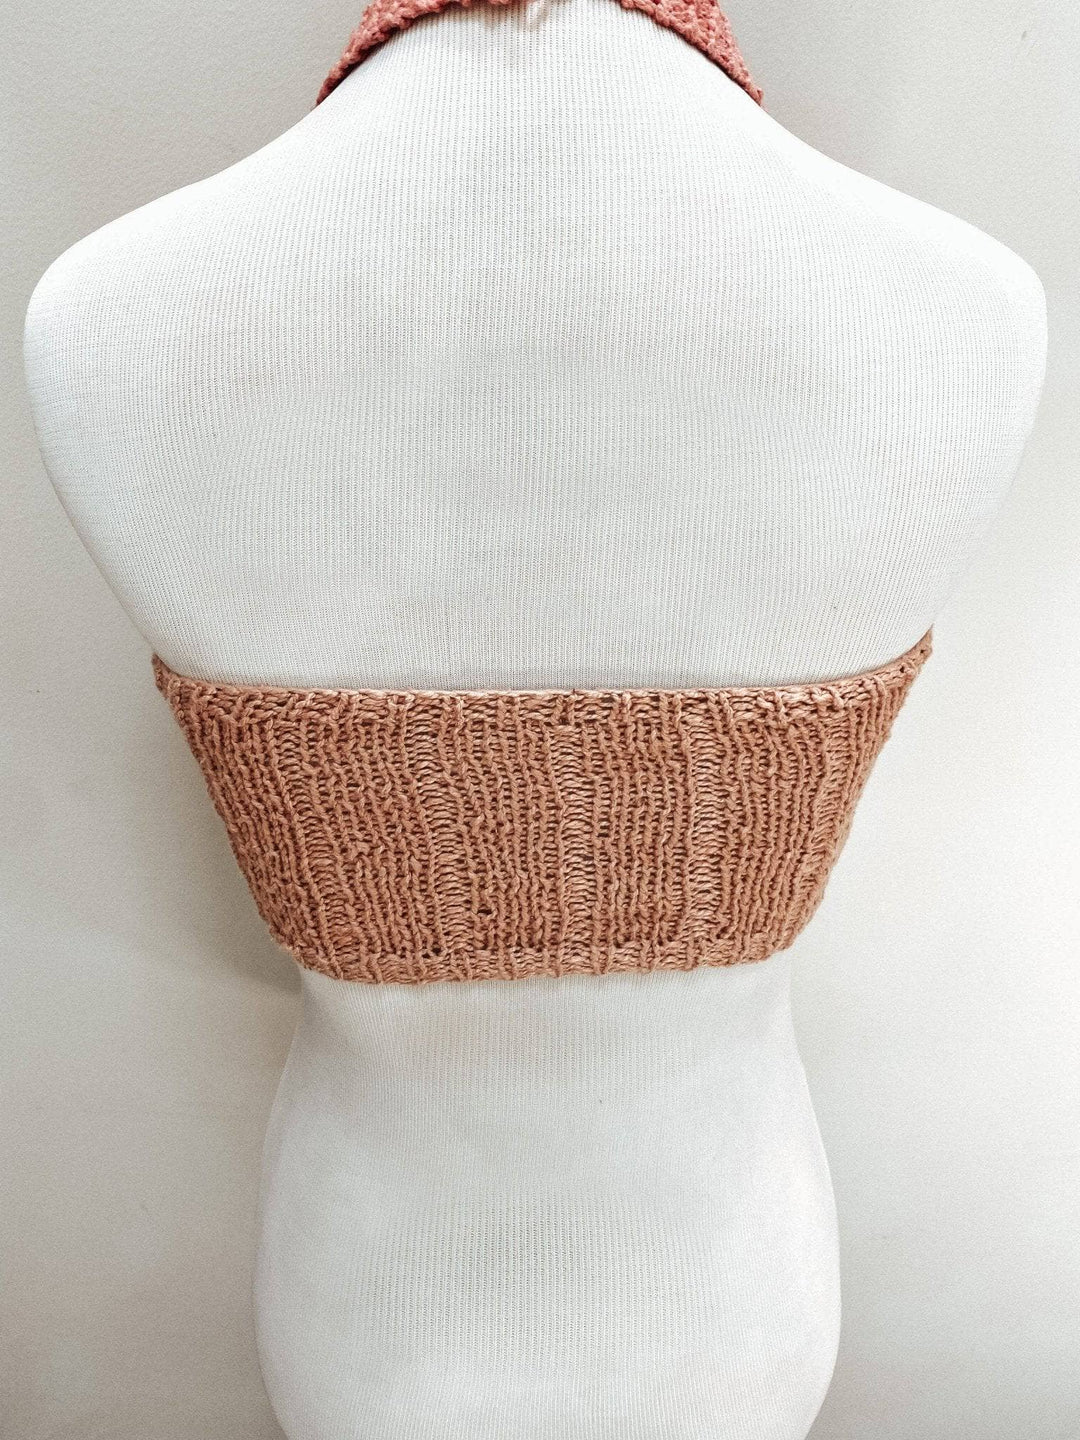 back view of mannequin wearing coconut tree pink knit bralette top.